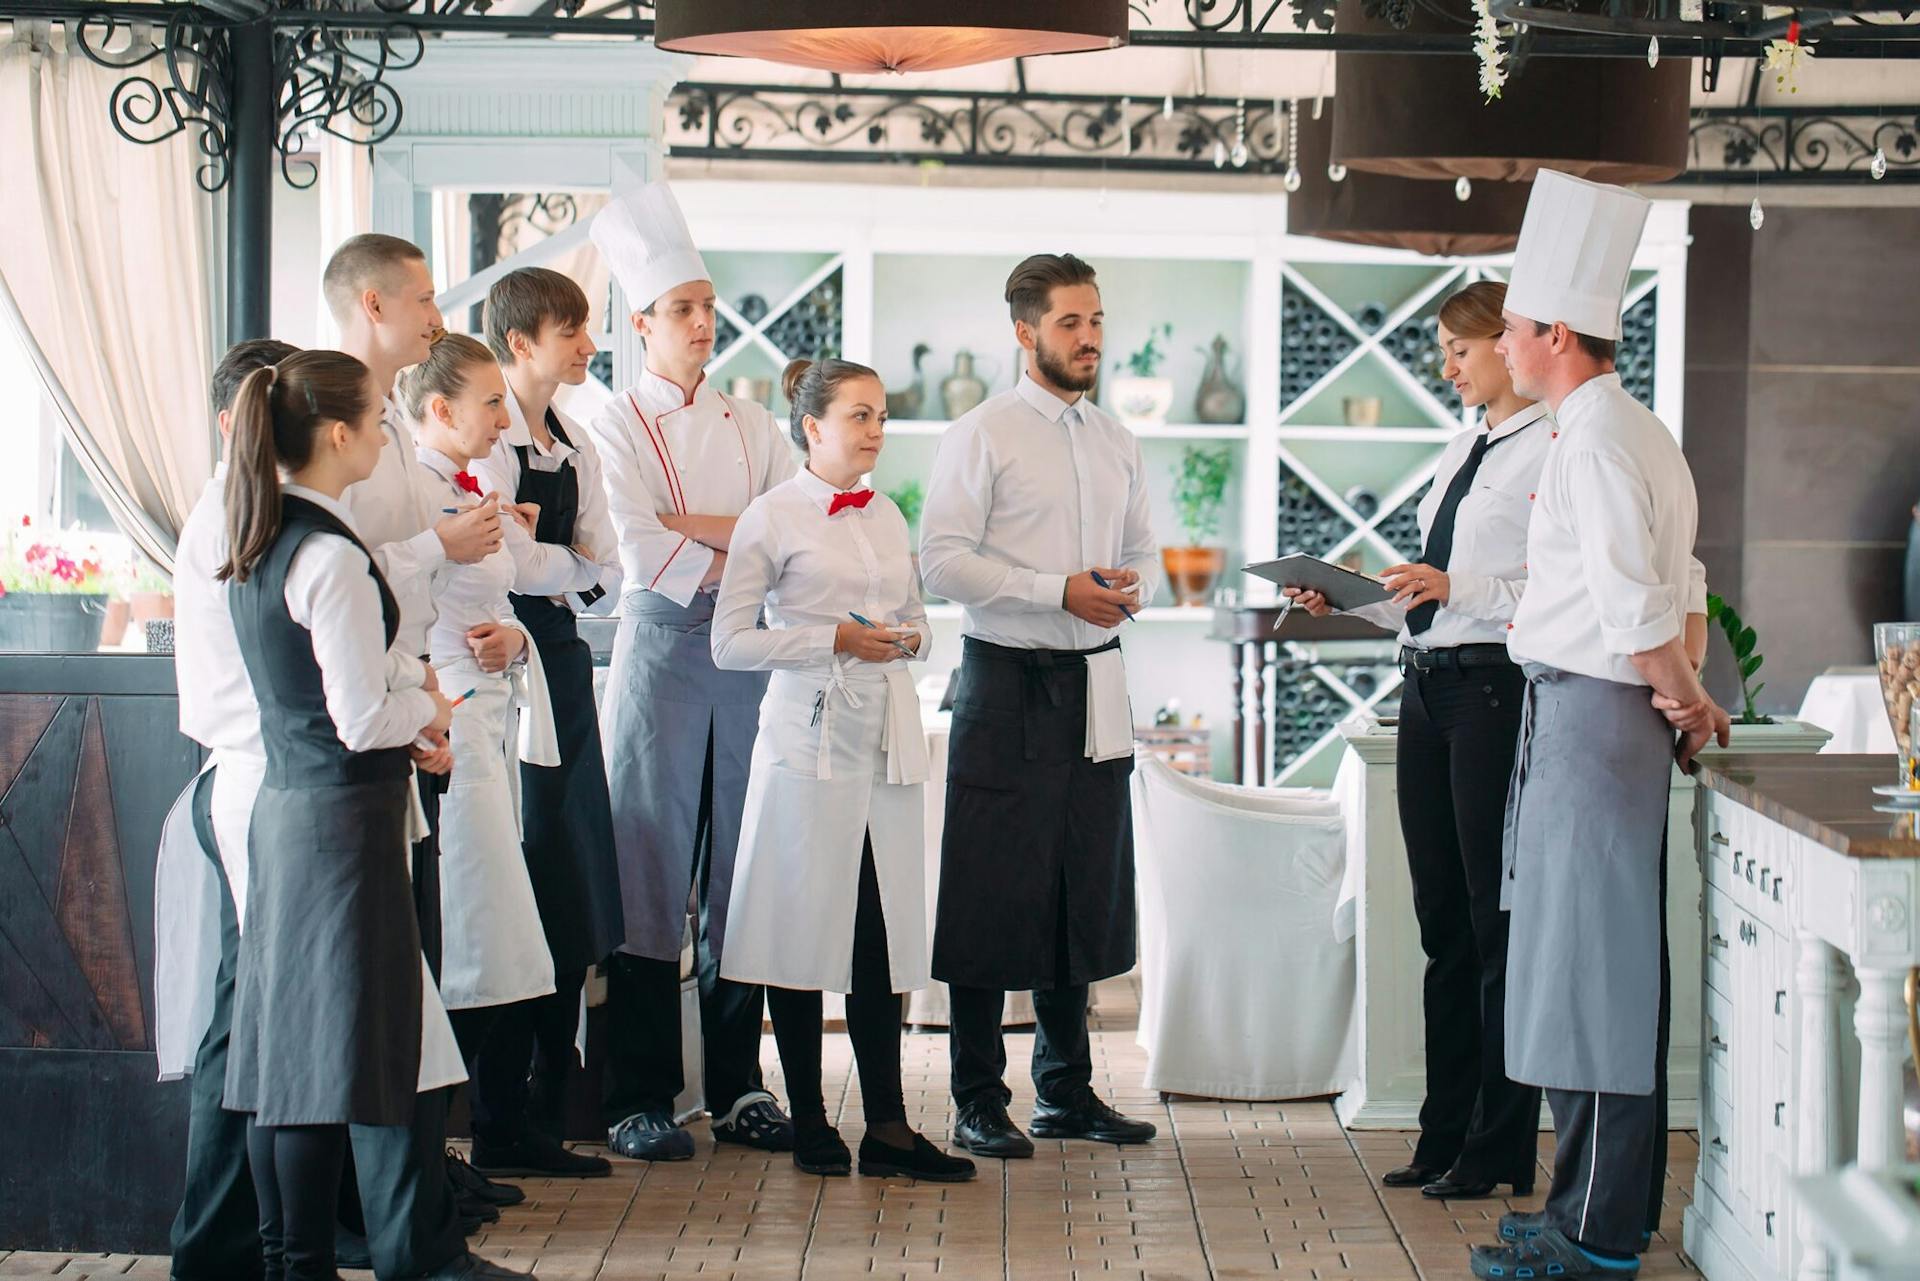 40 Restaurant Industry Statistics To Consider in the Wake of COVID-19